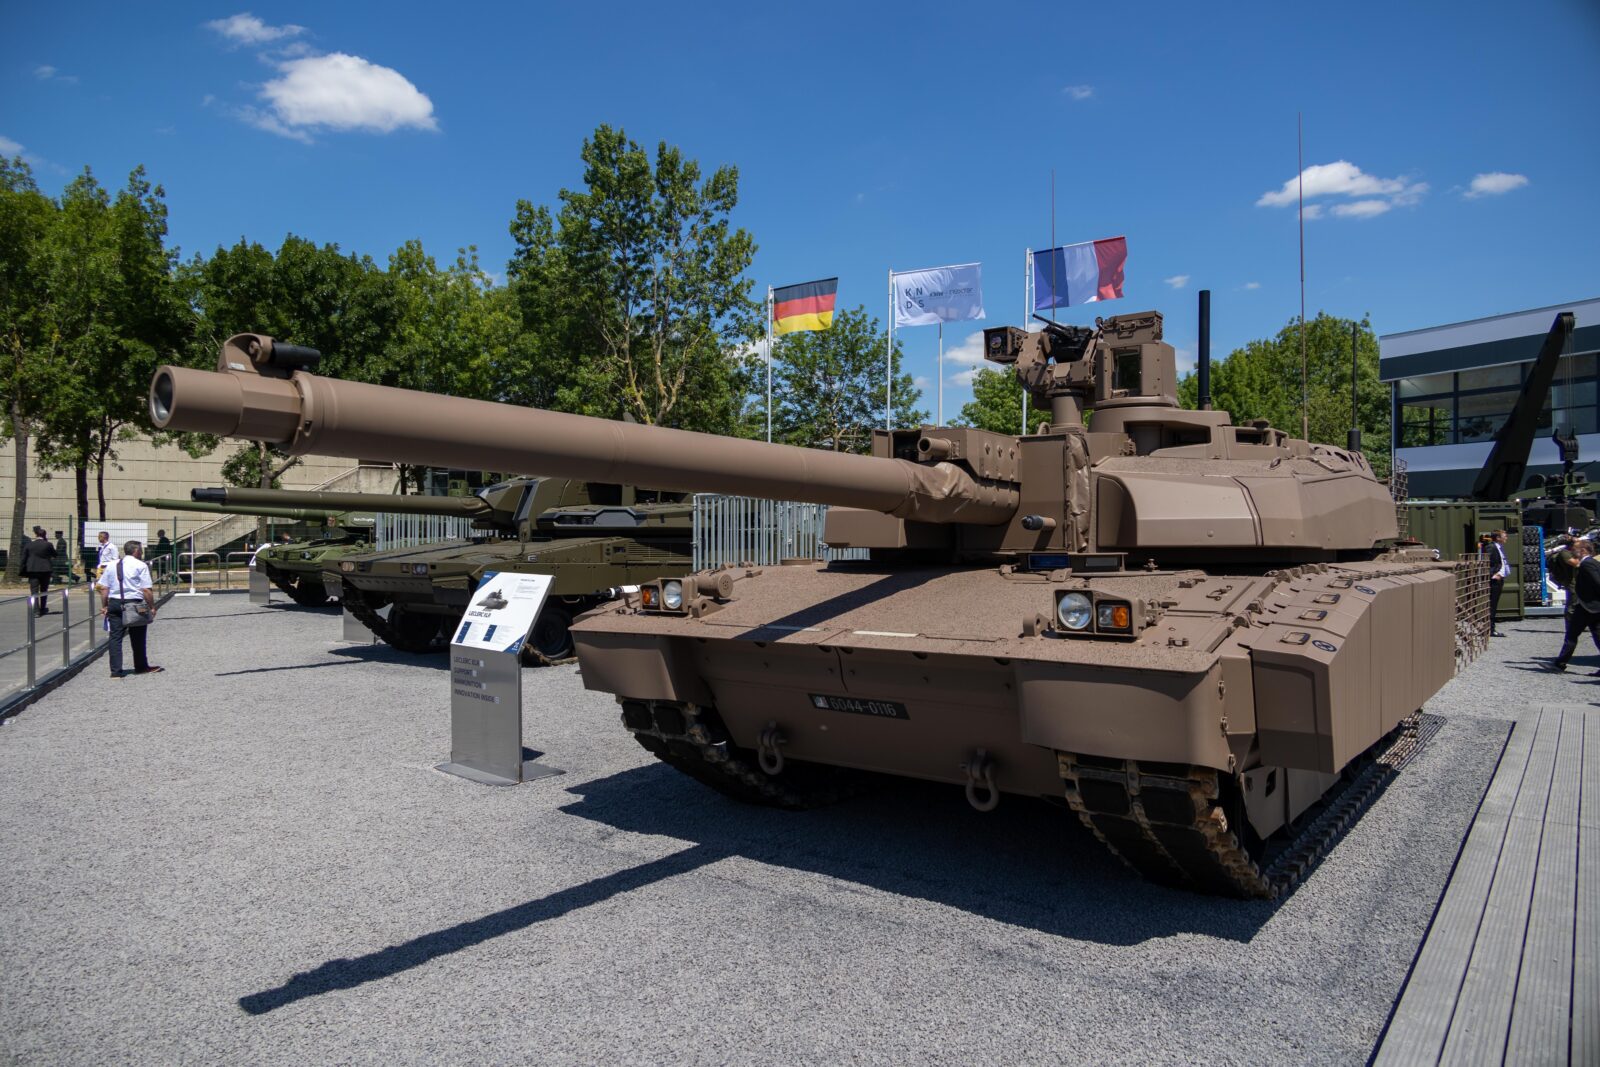 Nexter has been awarded a new order for renovated Leclerc tanks